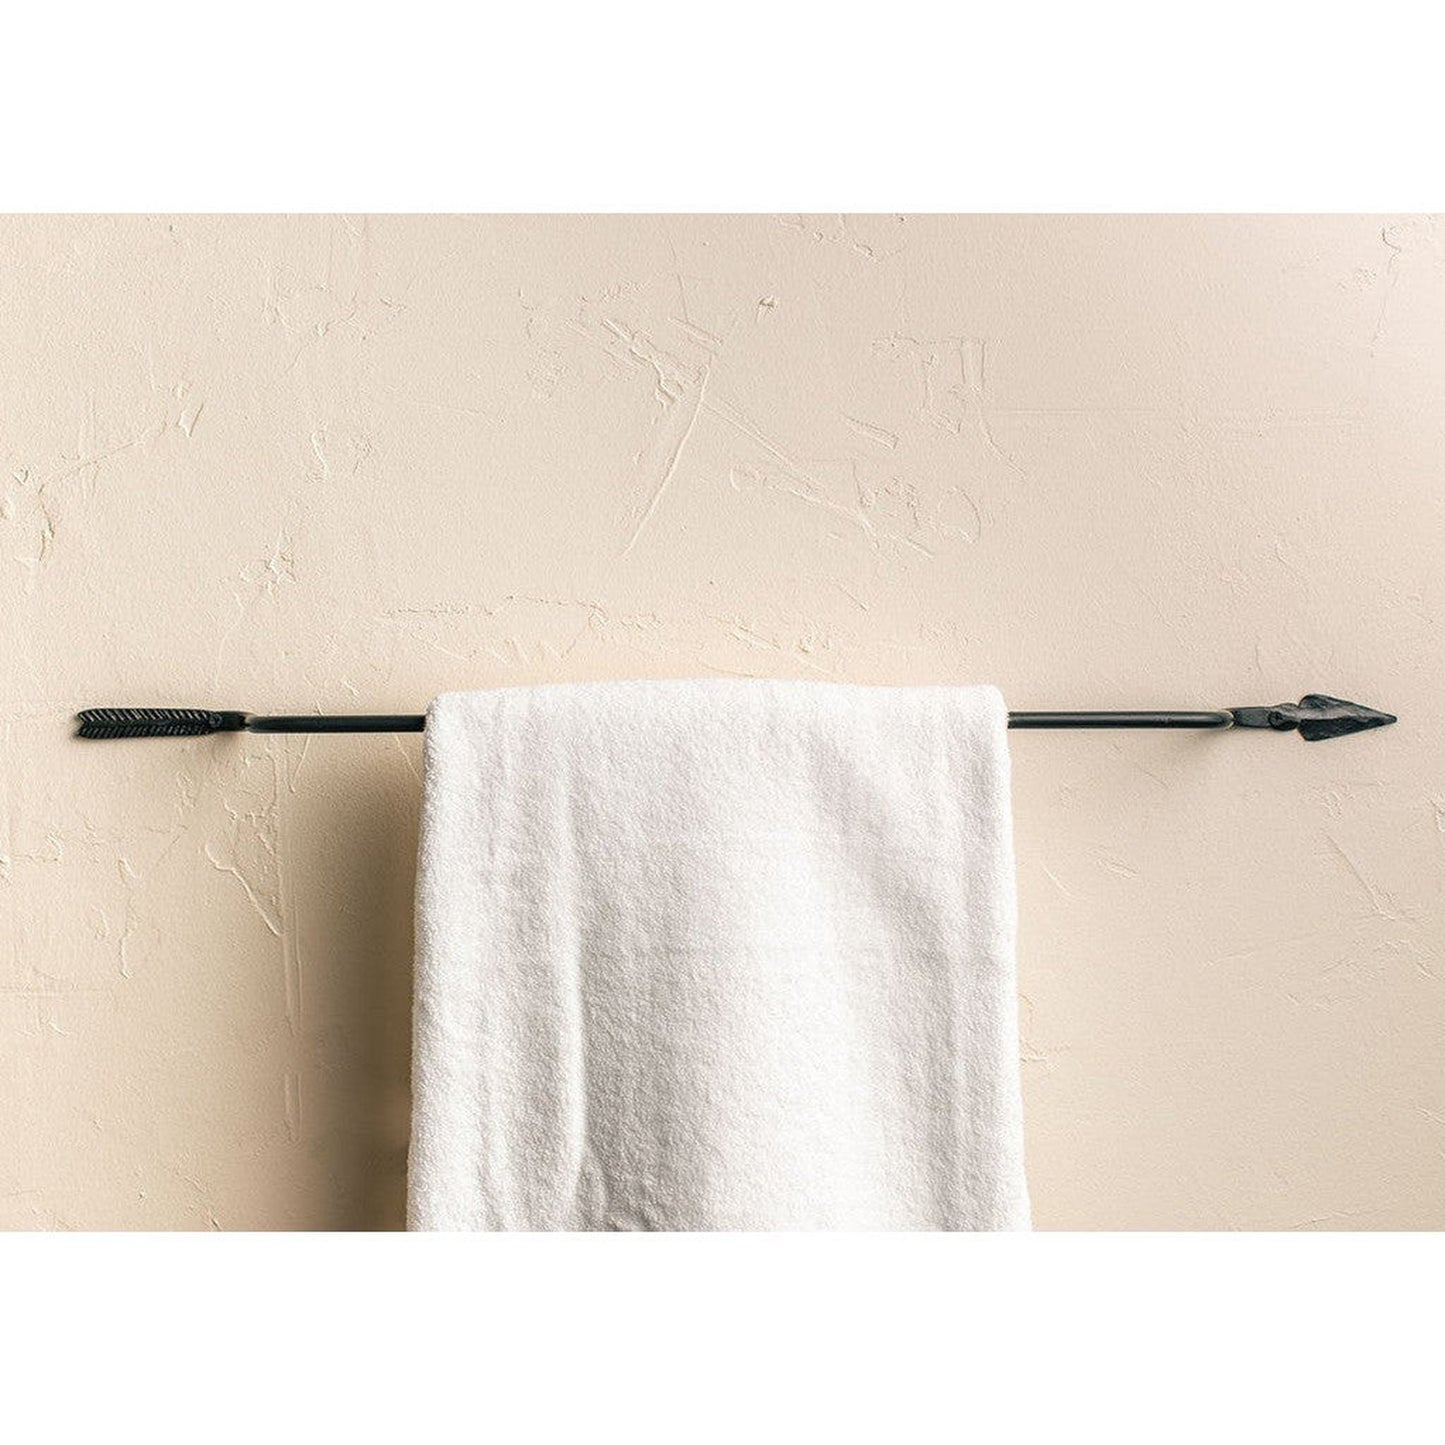 Stone County Ironworks Quapaw 24" Natural Black Iron Towel Bar With Copper Iron Accent